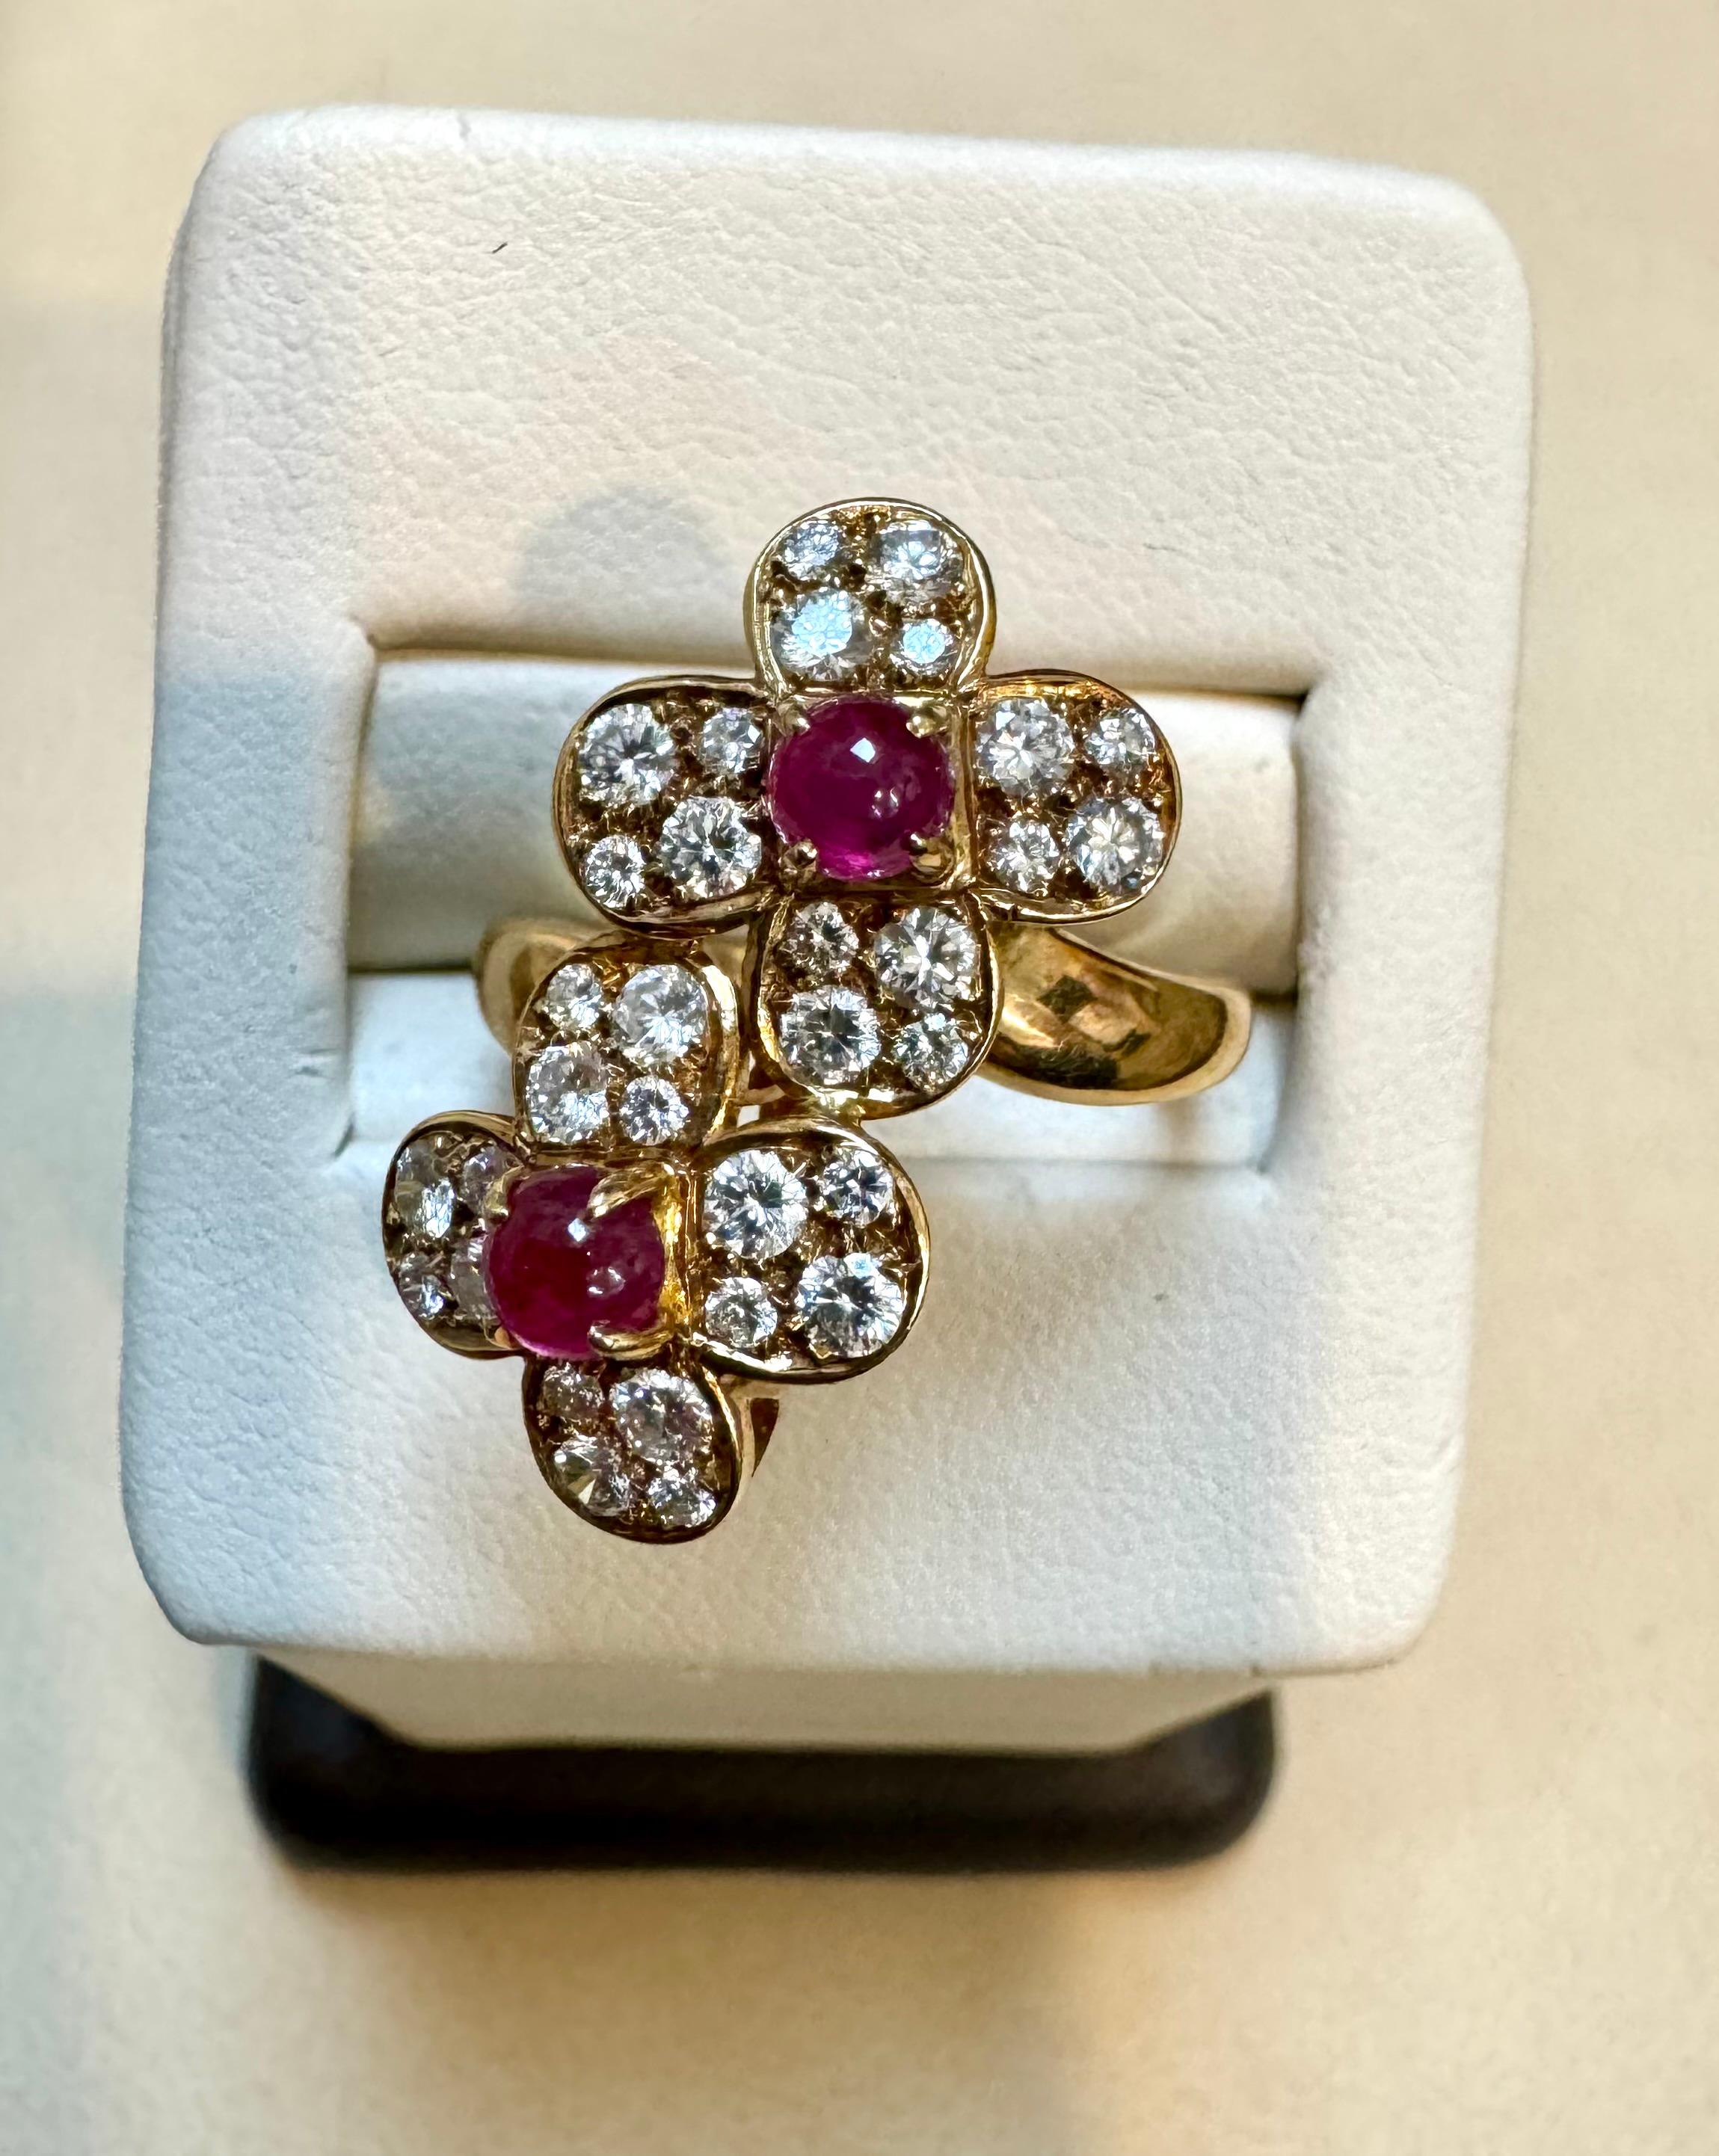 Van Cleef & Arpels Contemporary Ruby and Diamond “Trefle” Ring, 18KY Gold Size 6 For Sale 7